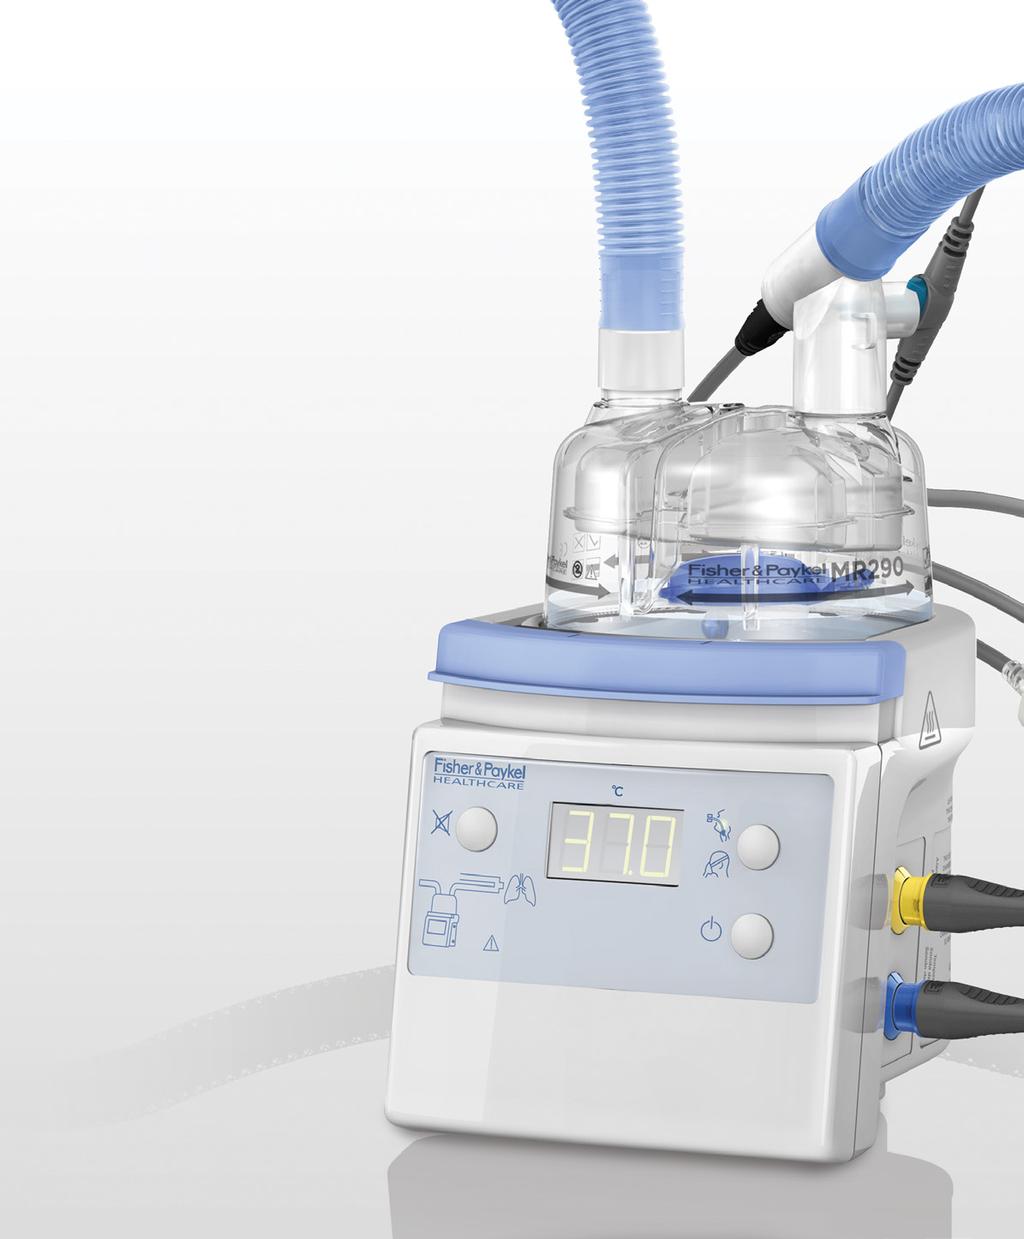 F&P 850 System - One solution for all patients In delivering humidification along the F&P Adult Respiratory Care Continuum, the F&P 850 System represents an efficient,